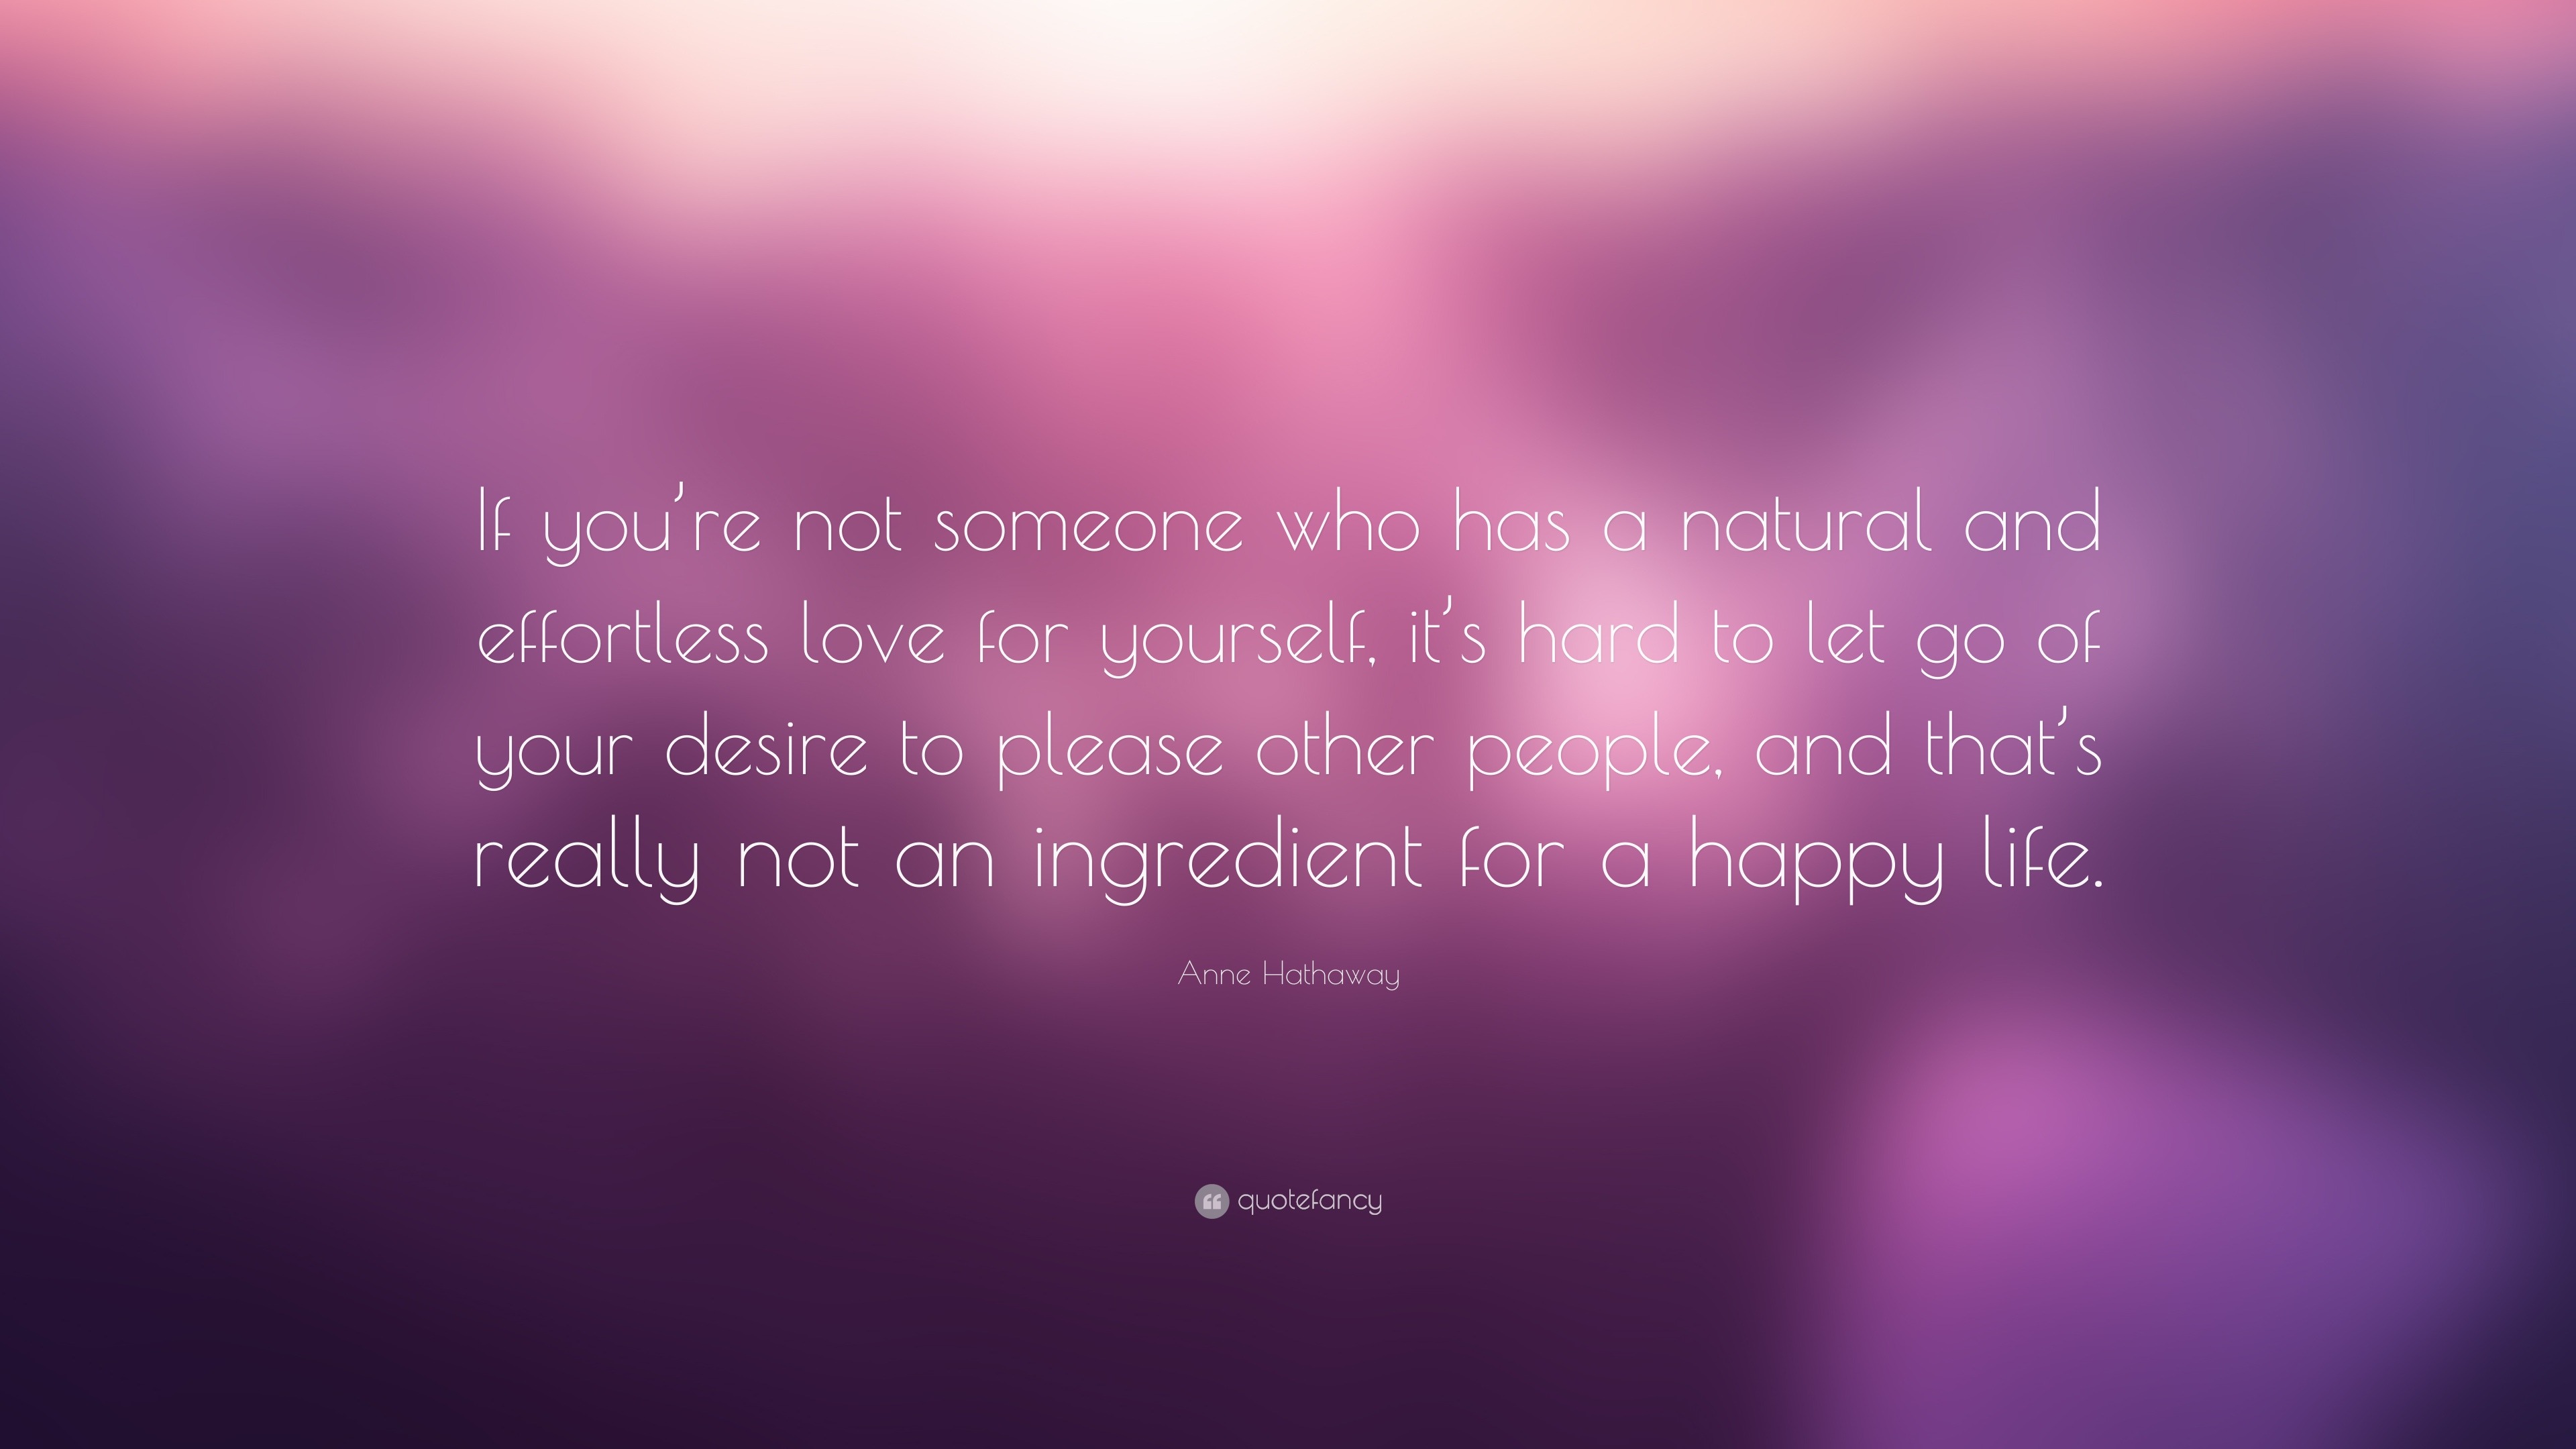 Anne Hathaway Quote “If you re not someone who has a natural and